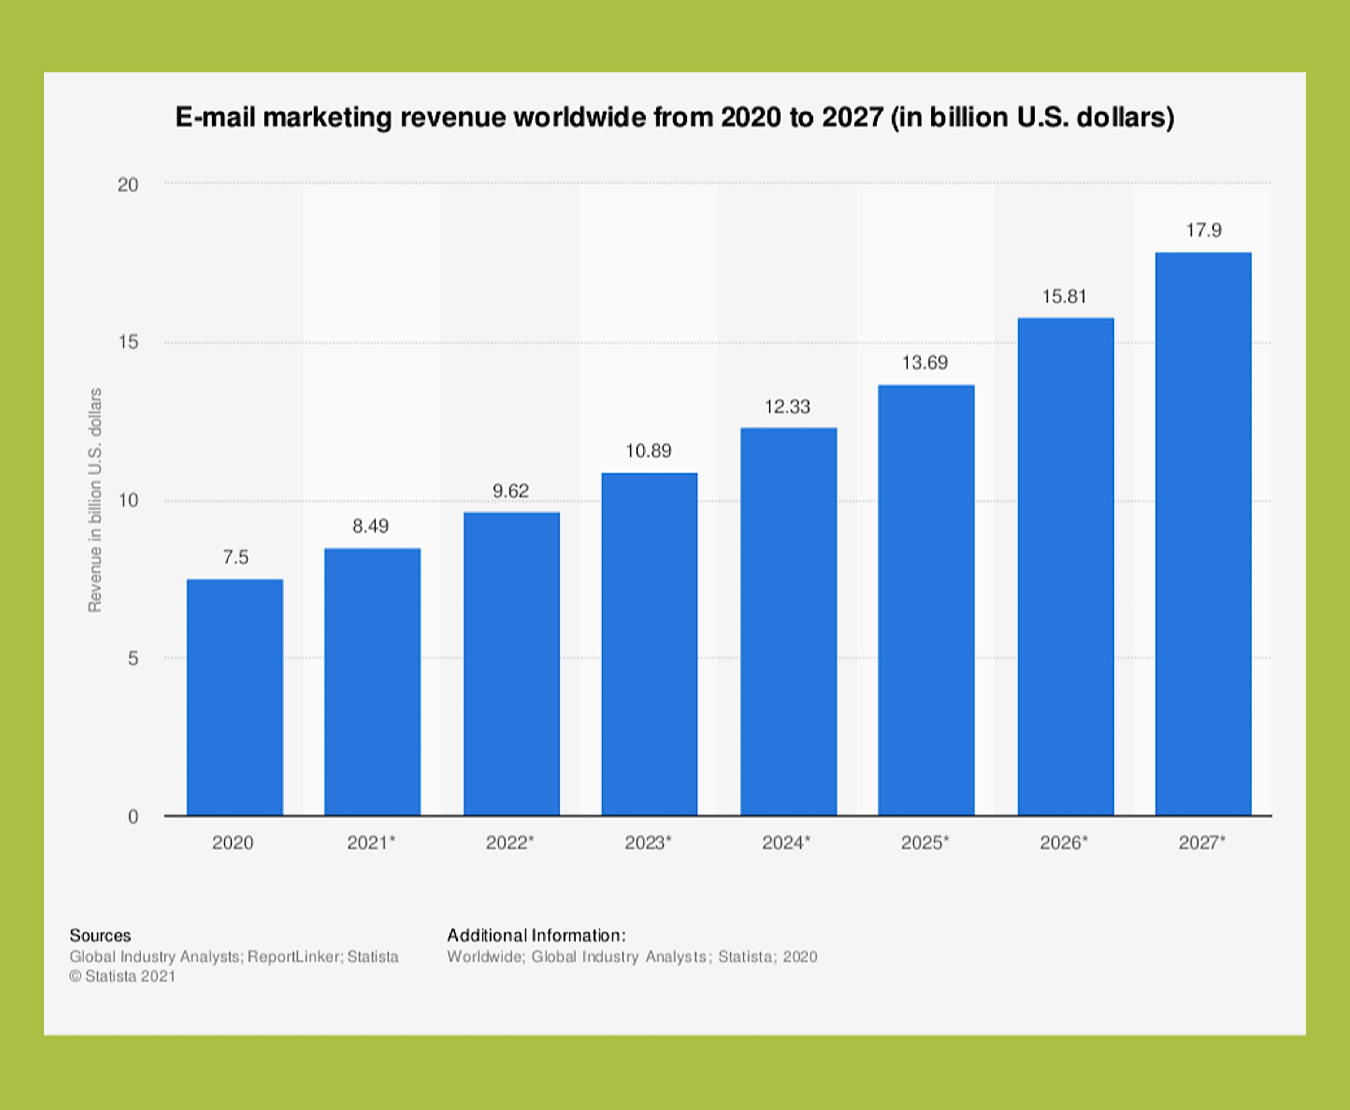 B2B email marketing optimization matters as email marketing revenue tops $9.62 billion in 2022, growing to $17.9 billion by 2027